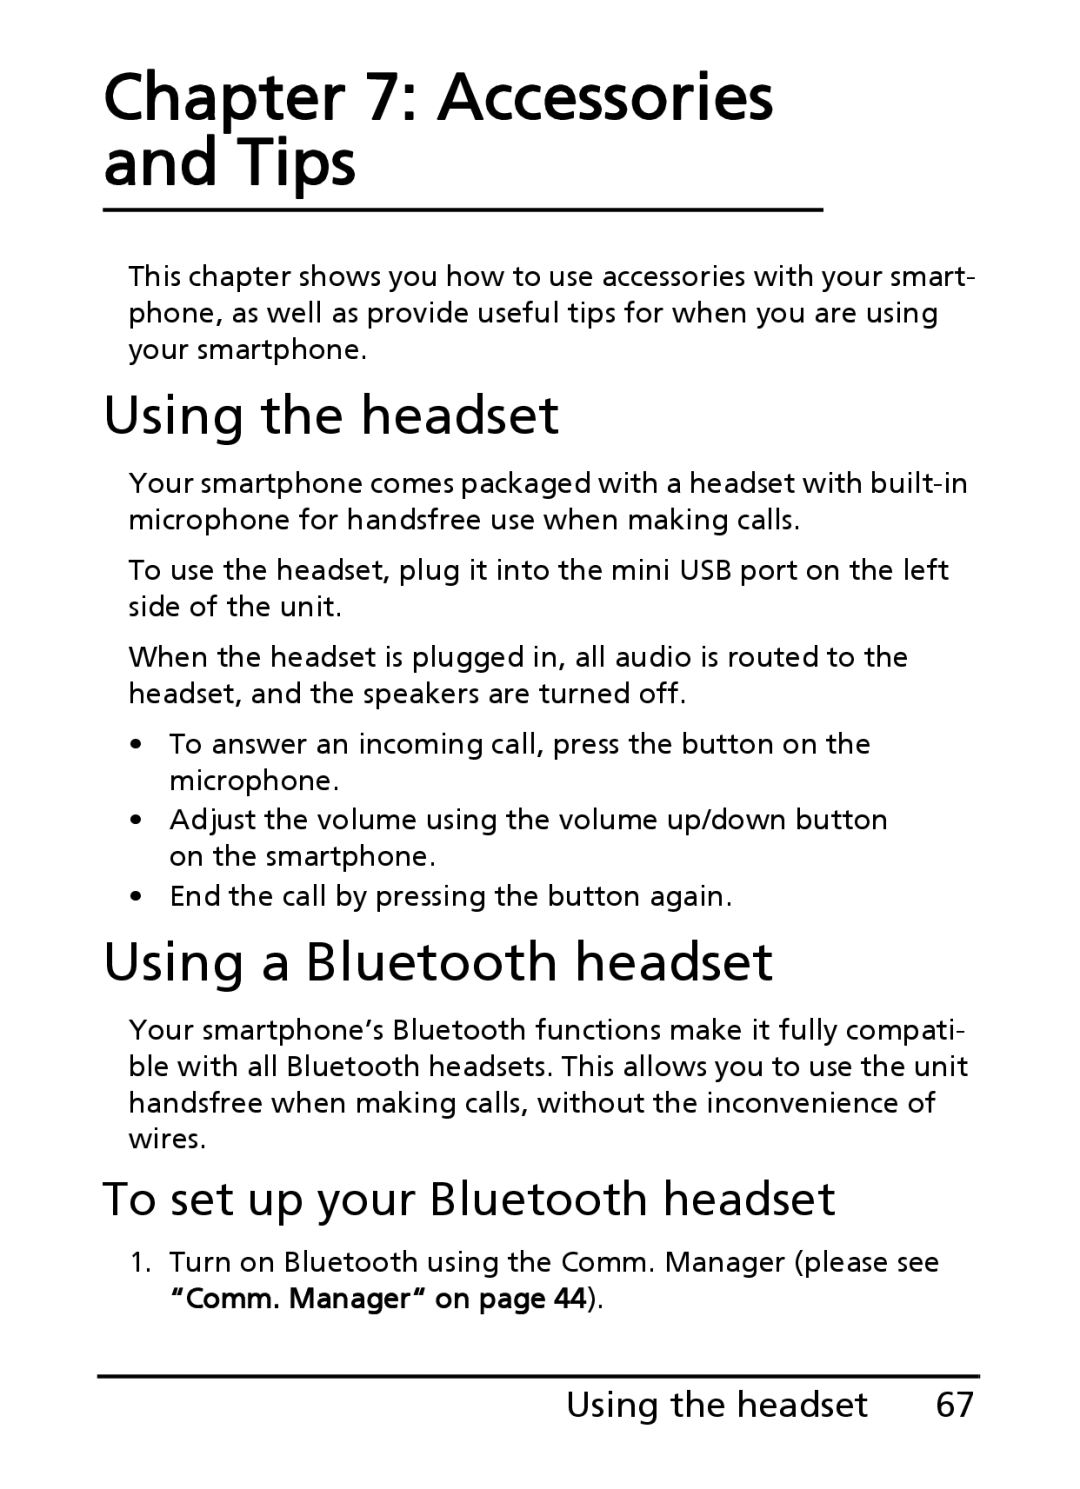 Acer E200 manual Accessories and Tips, Using the headset, Using a Bluetooth headset, To set up your Bluetooth headset 